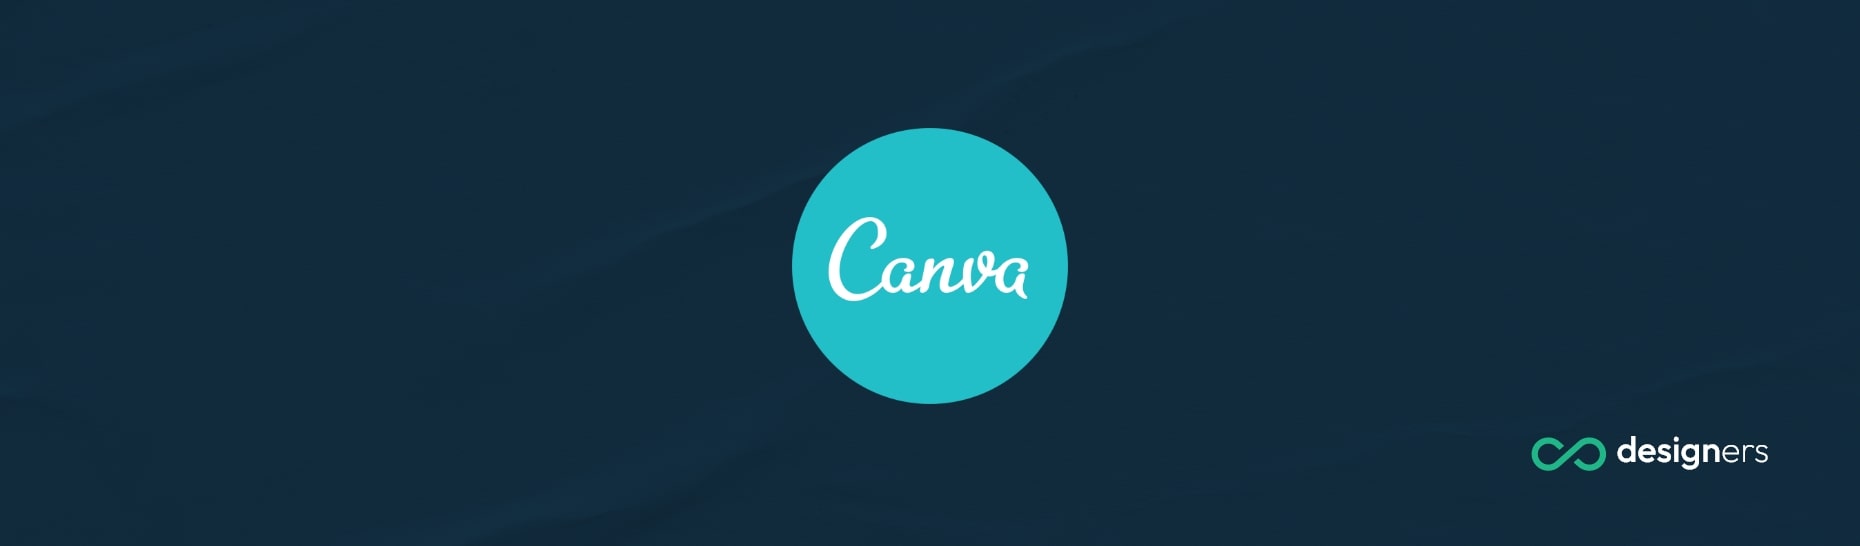 Is Canva free for nonprofits?